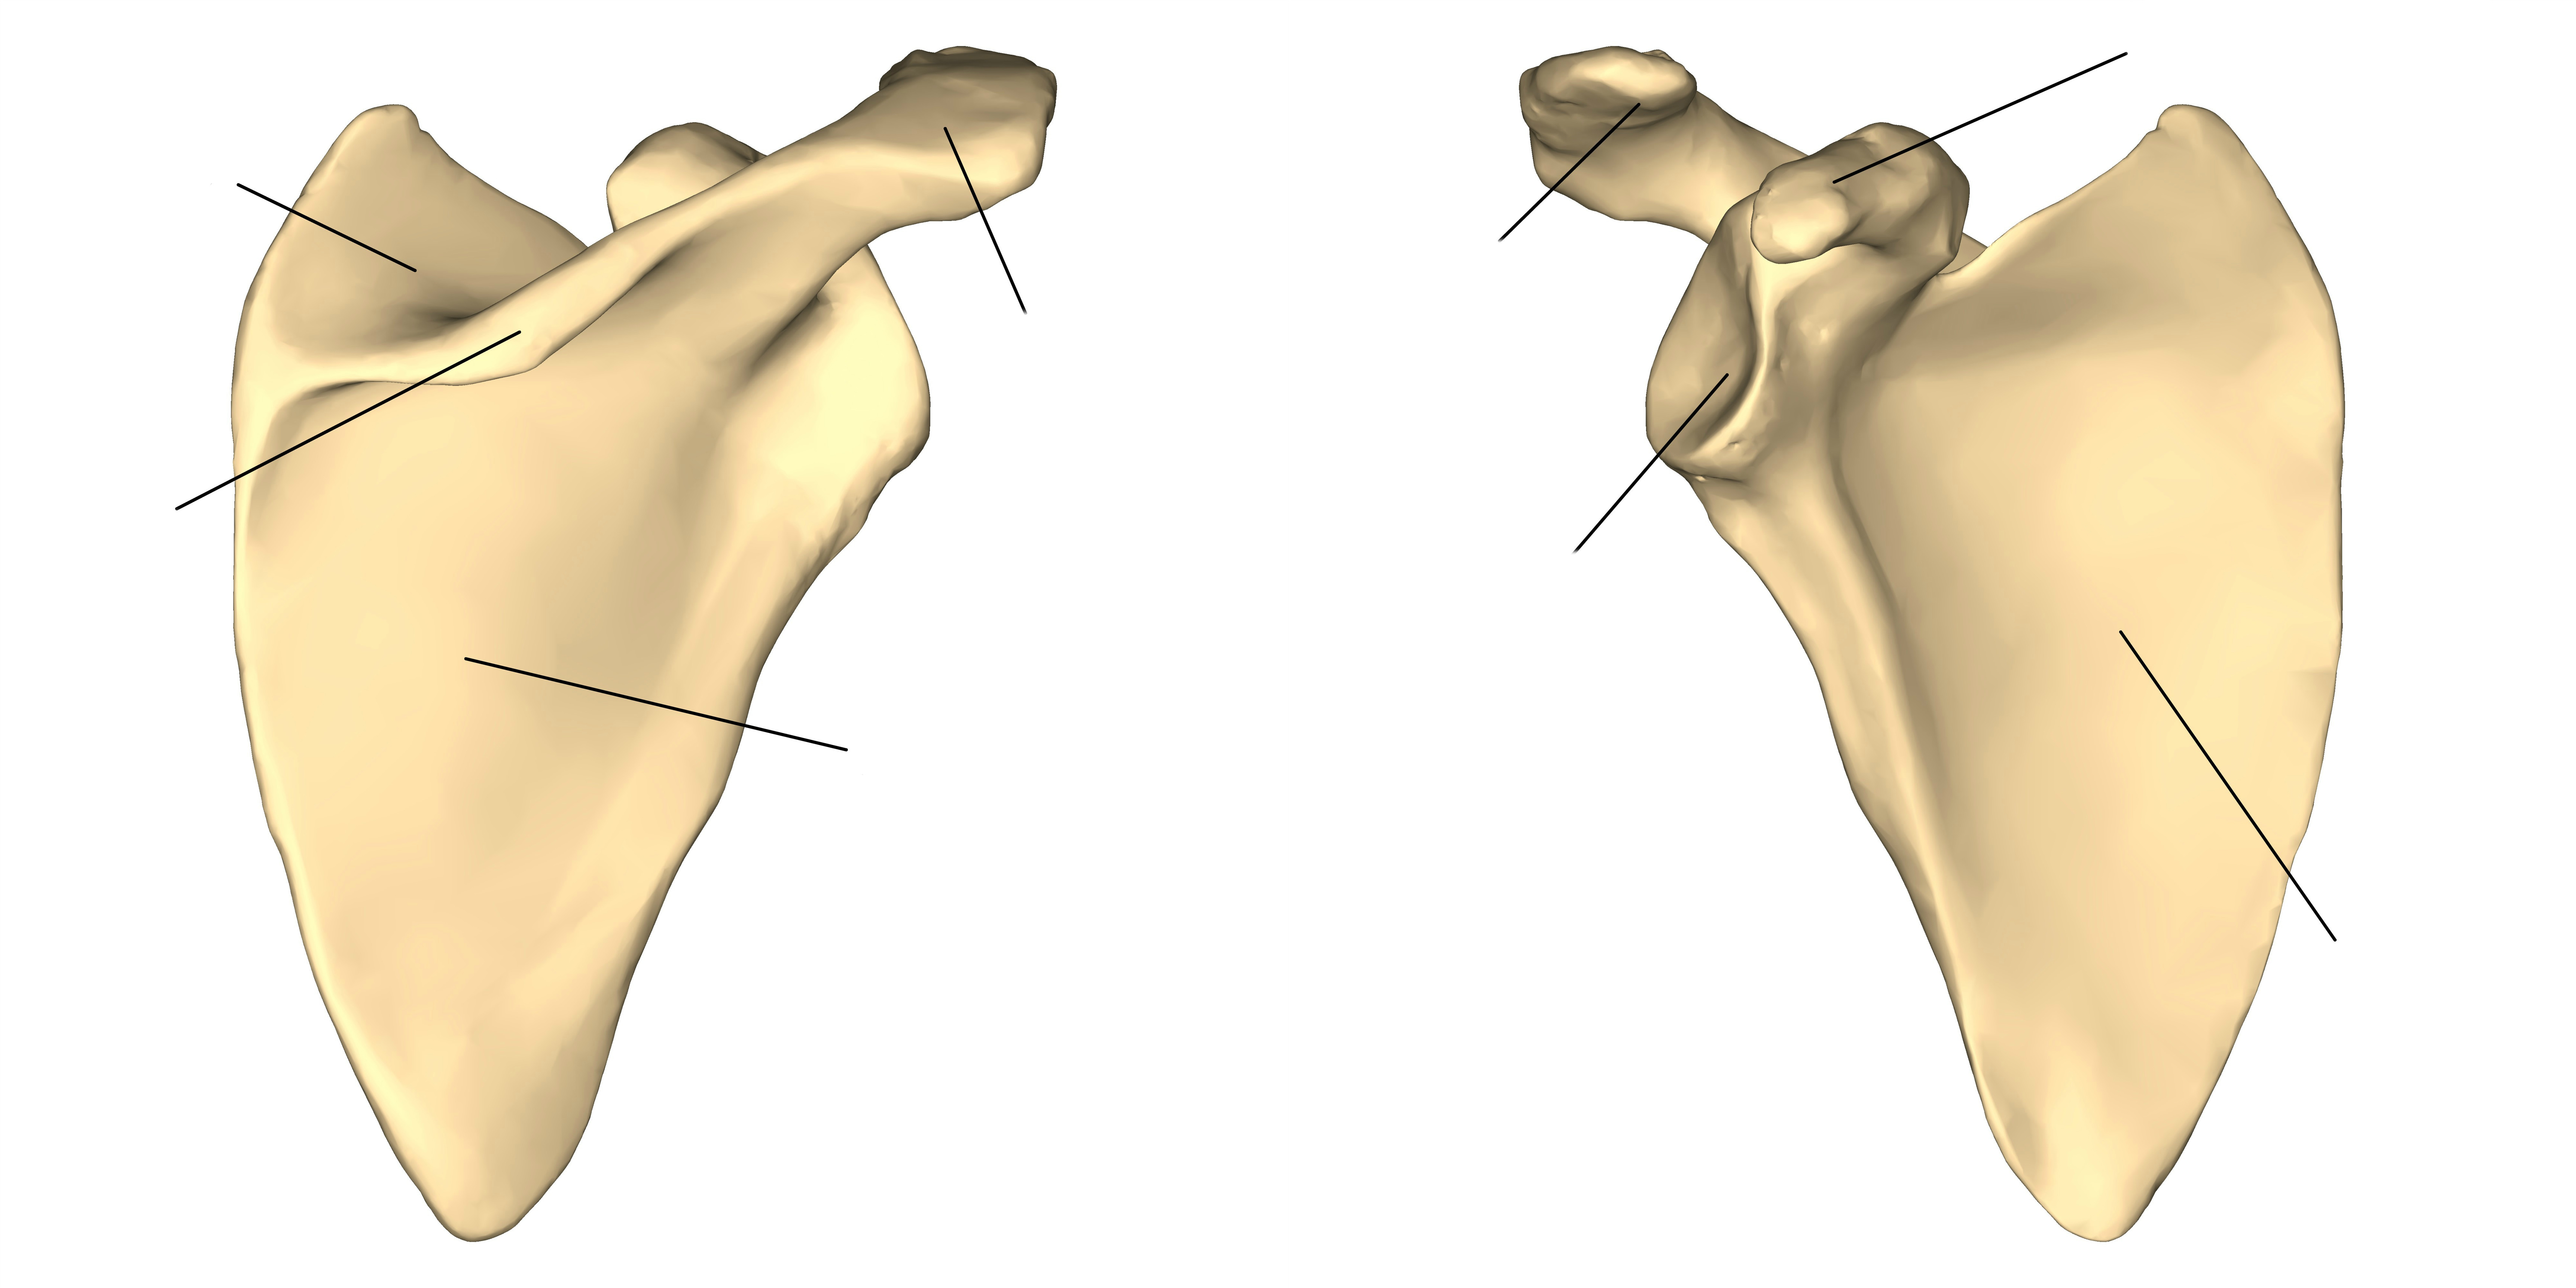 Label the features of the scapula